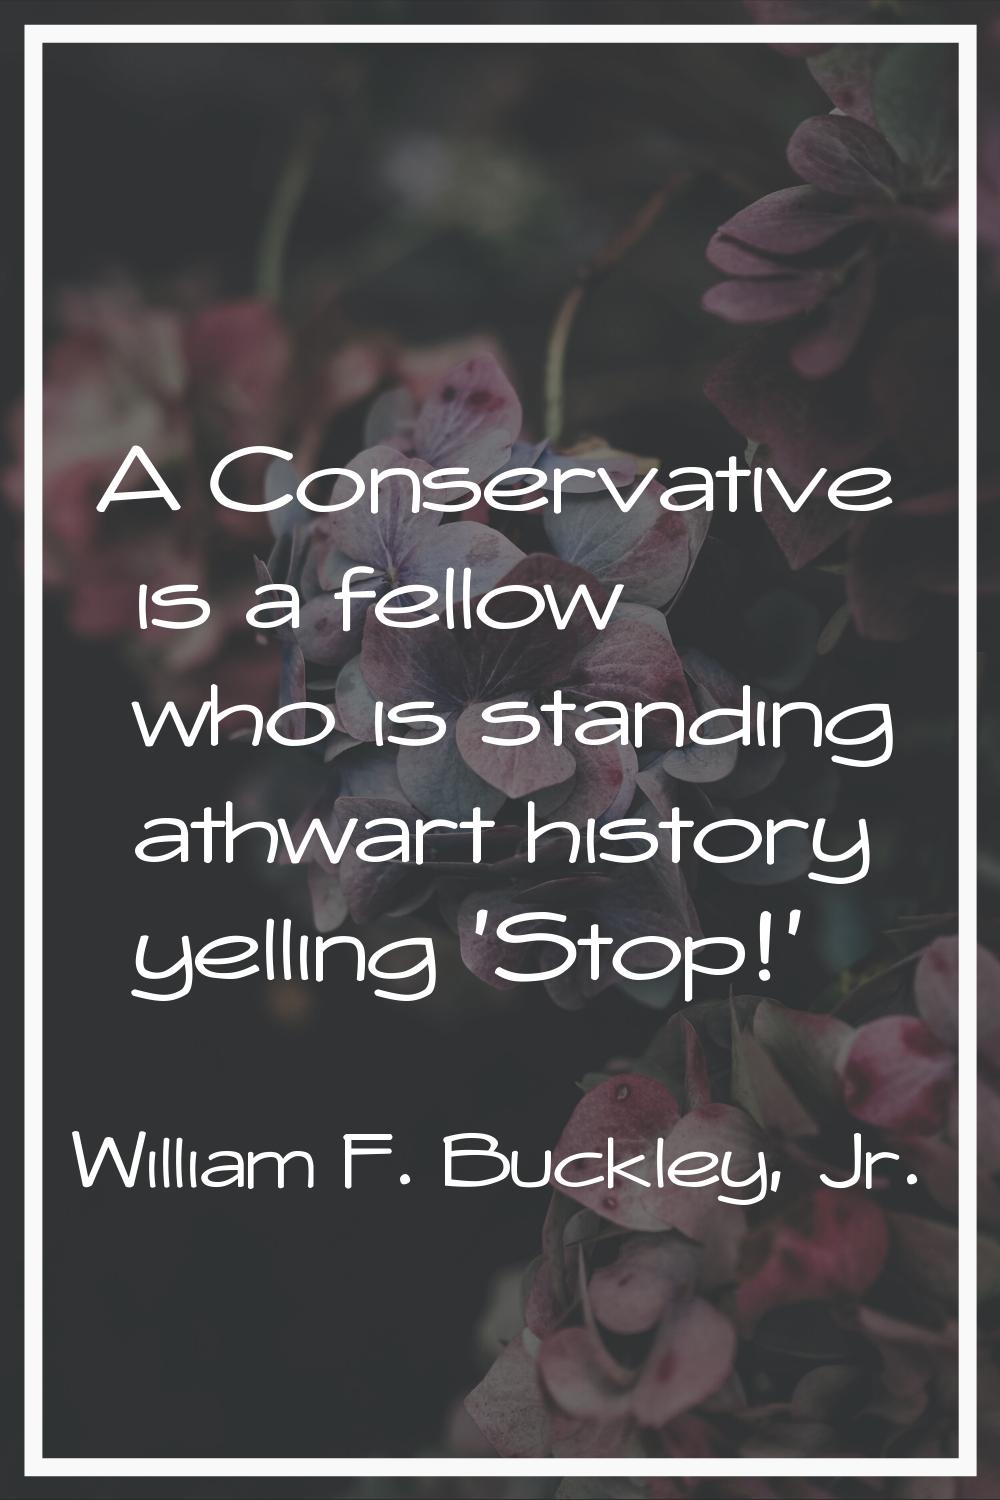 A Conservative is a fellow who is standing athwart history yelling 'Stop!'